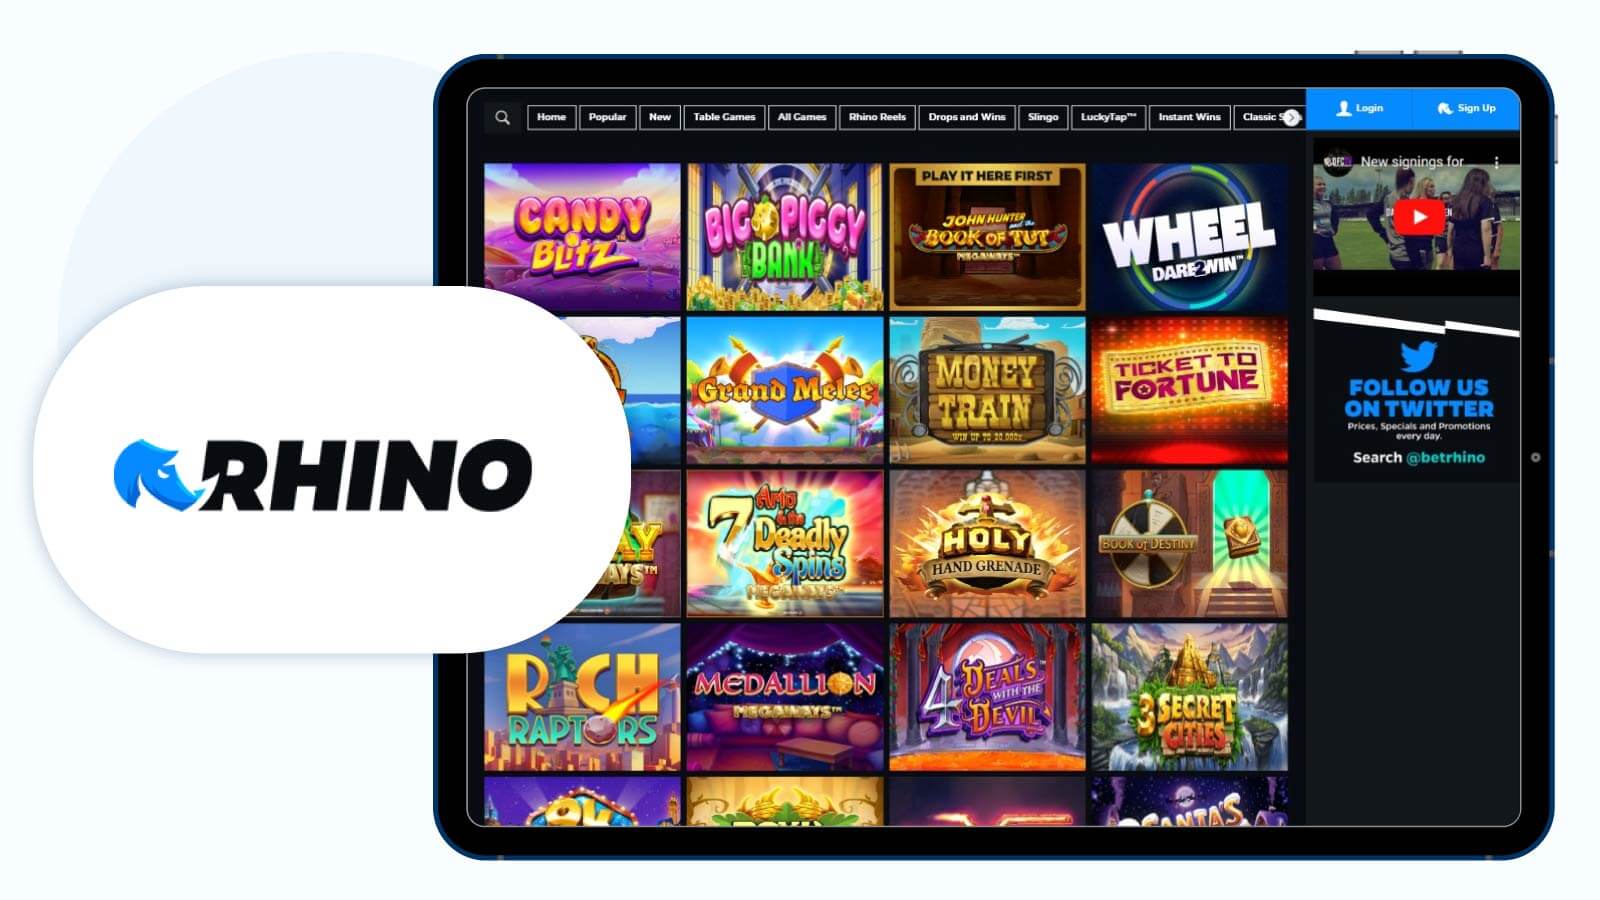 Rhino.bet Casino Limitless Deposits & Withdrawals with MasterCard